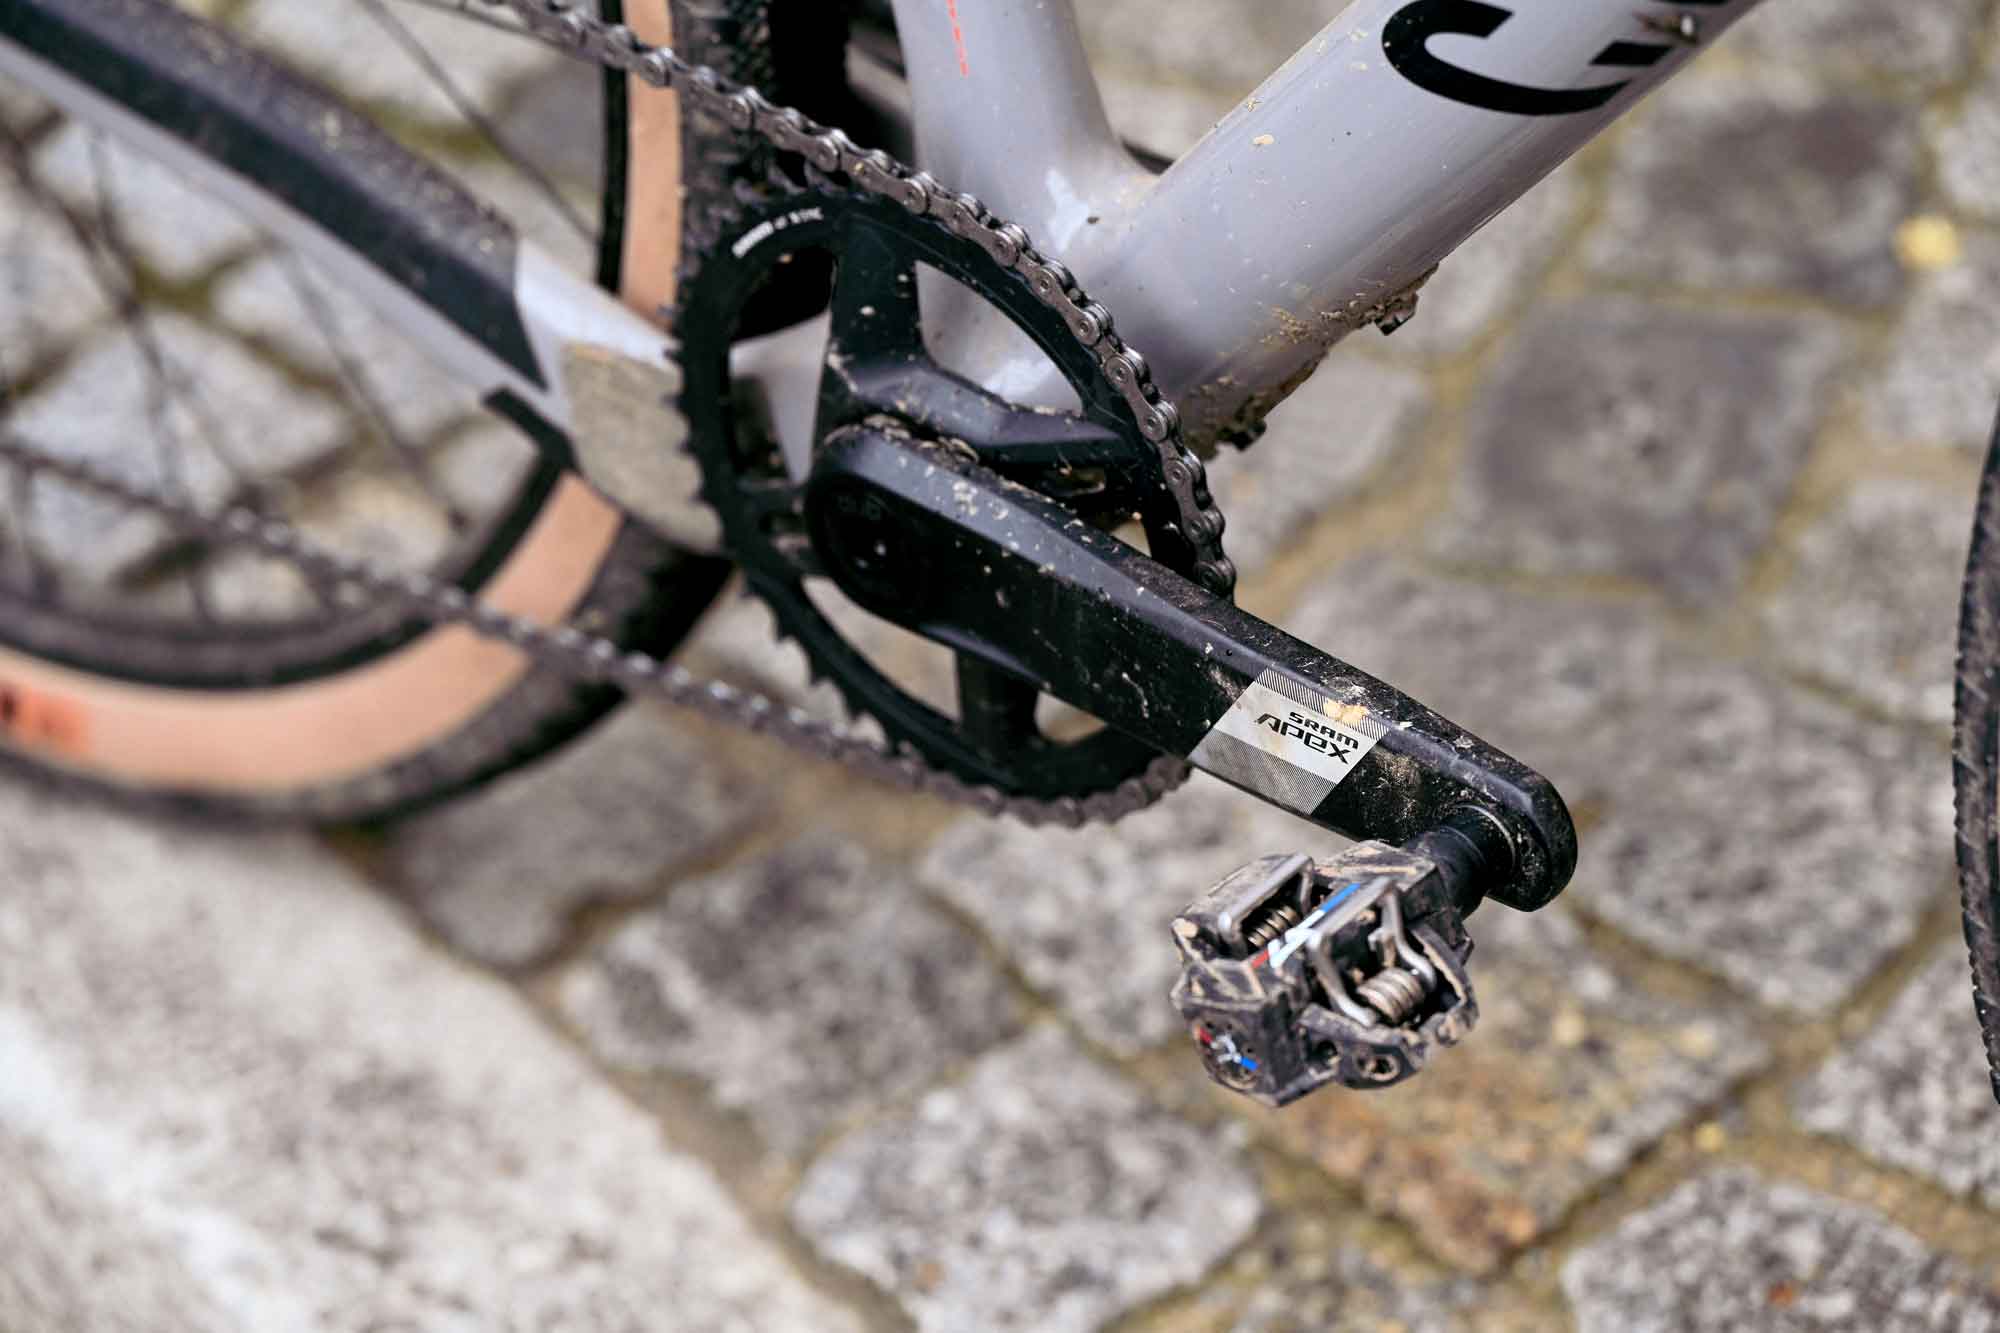 Everything on the crank is mechanical anyway. Except.... : you decide on the powermeter upgrade. This makes the new sram apex groupset an exciting alternative even for professional sports use.